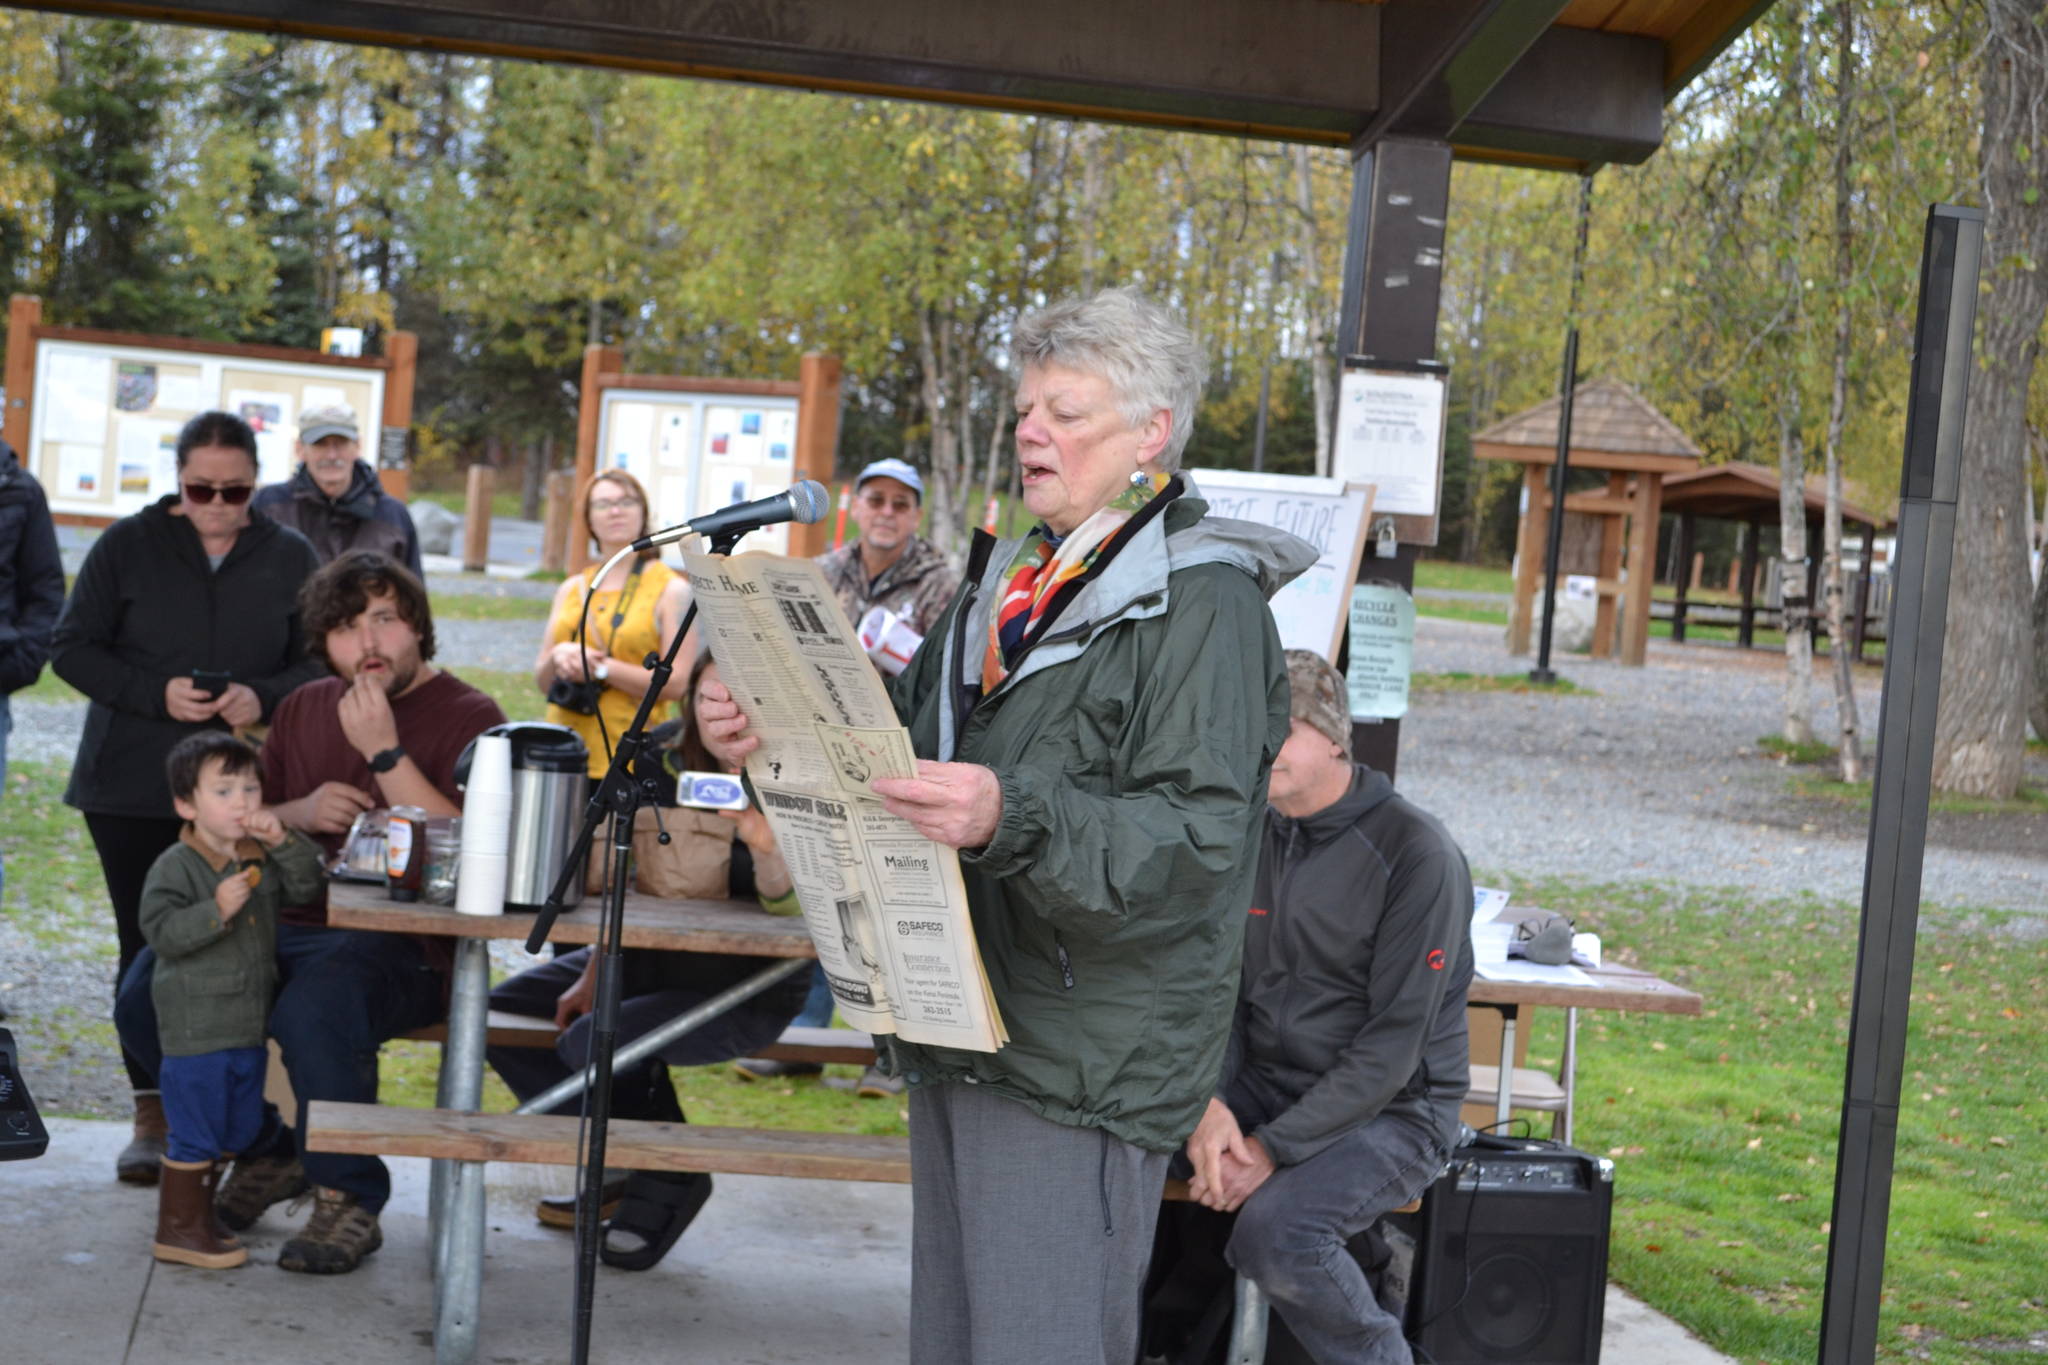 Soldotna Business Owner Peggy Mullen reads a newspaper from 1994 that warns of the negative effects of pollution at the Soldotna Climate Strike in Soldotna Creek Park on Sept. 20, 2019. (Photo by Brian Mazurek/Peninsula Clarion)